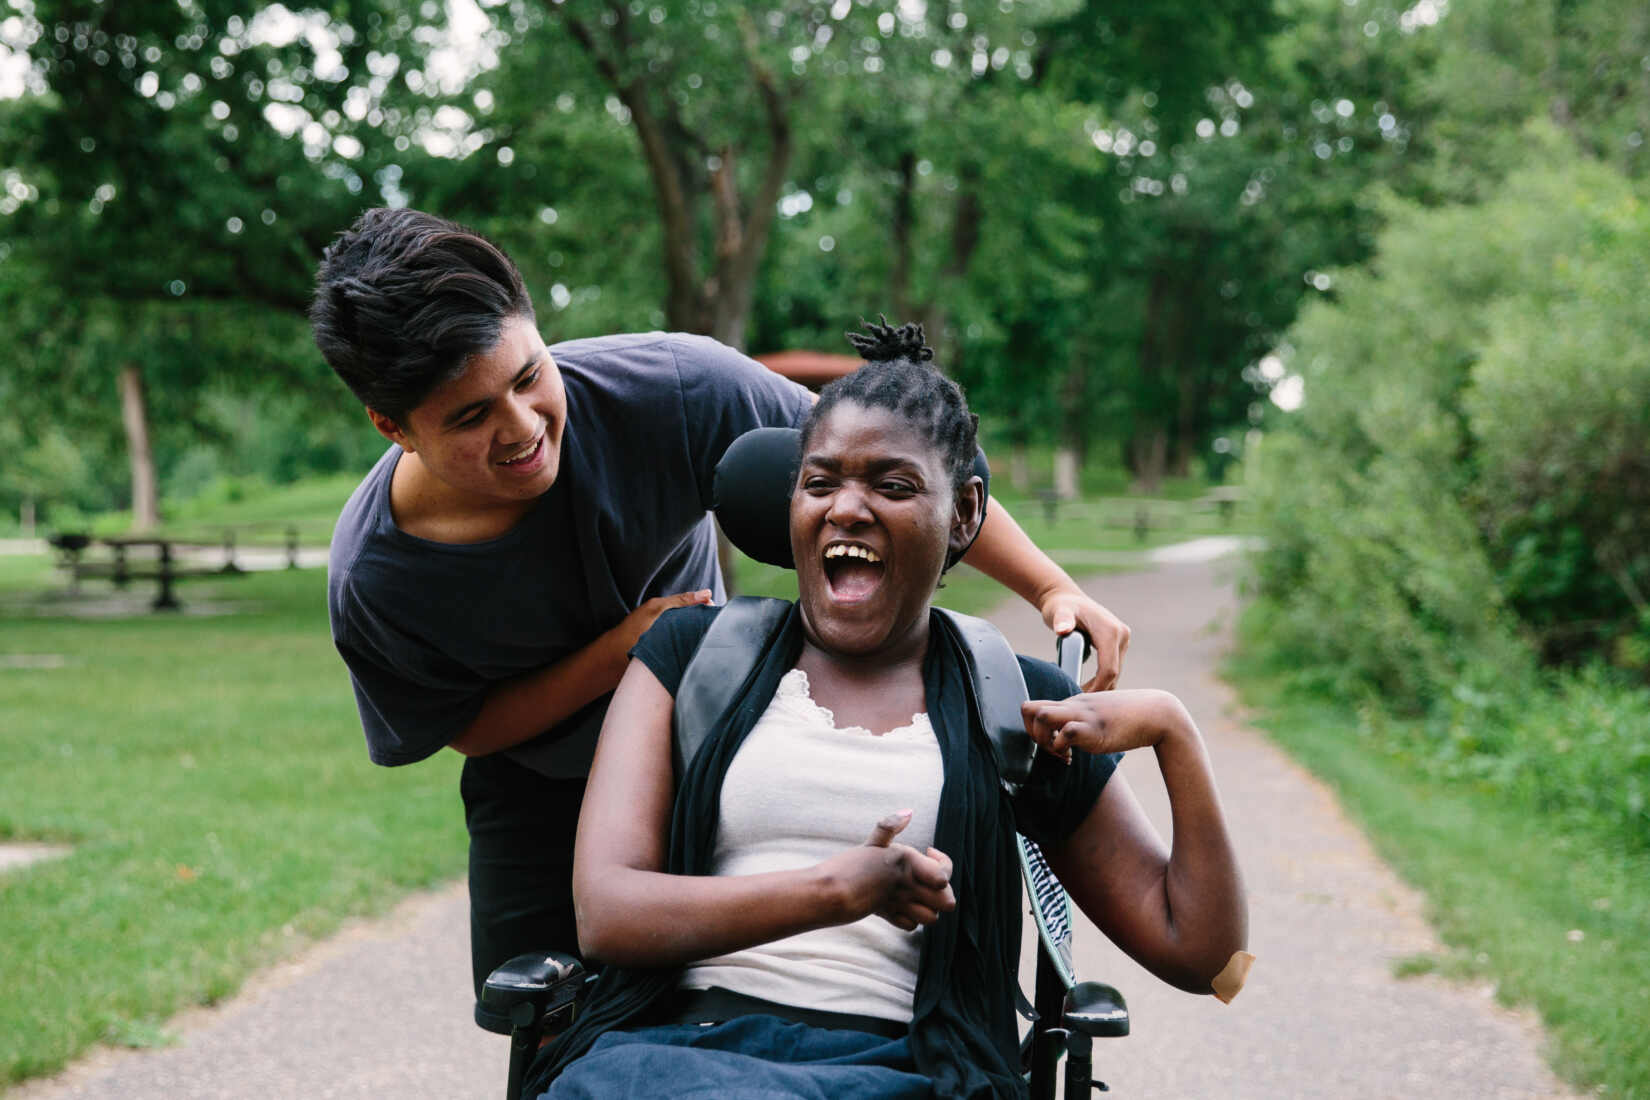 accessible parks in the twin cities area of minnesota